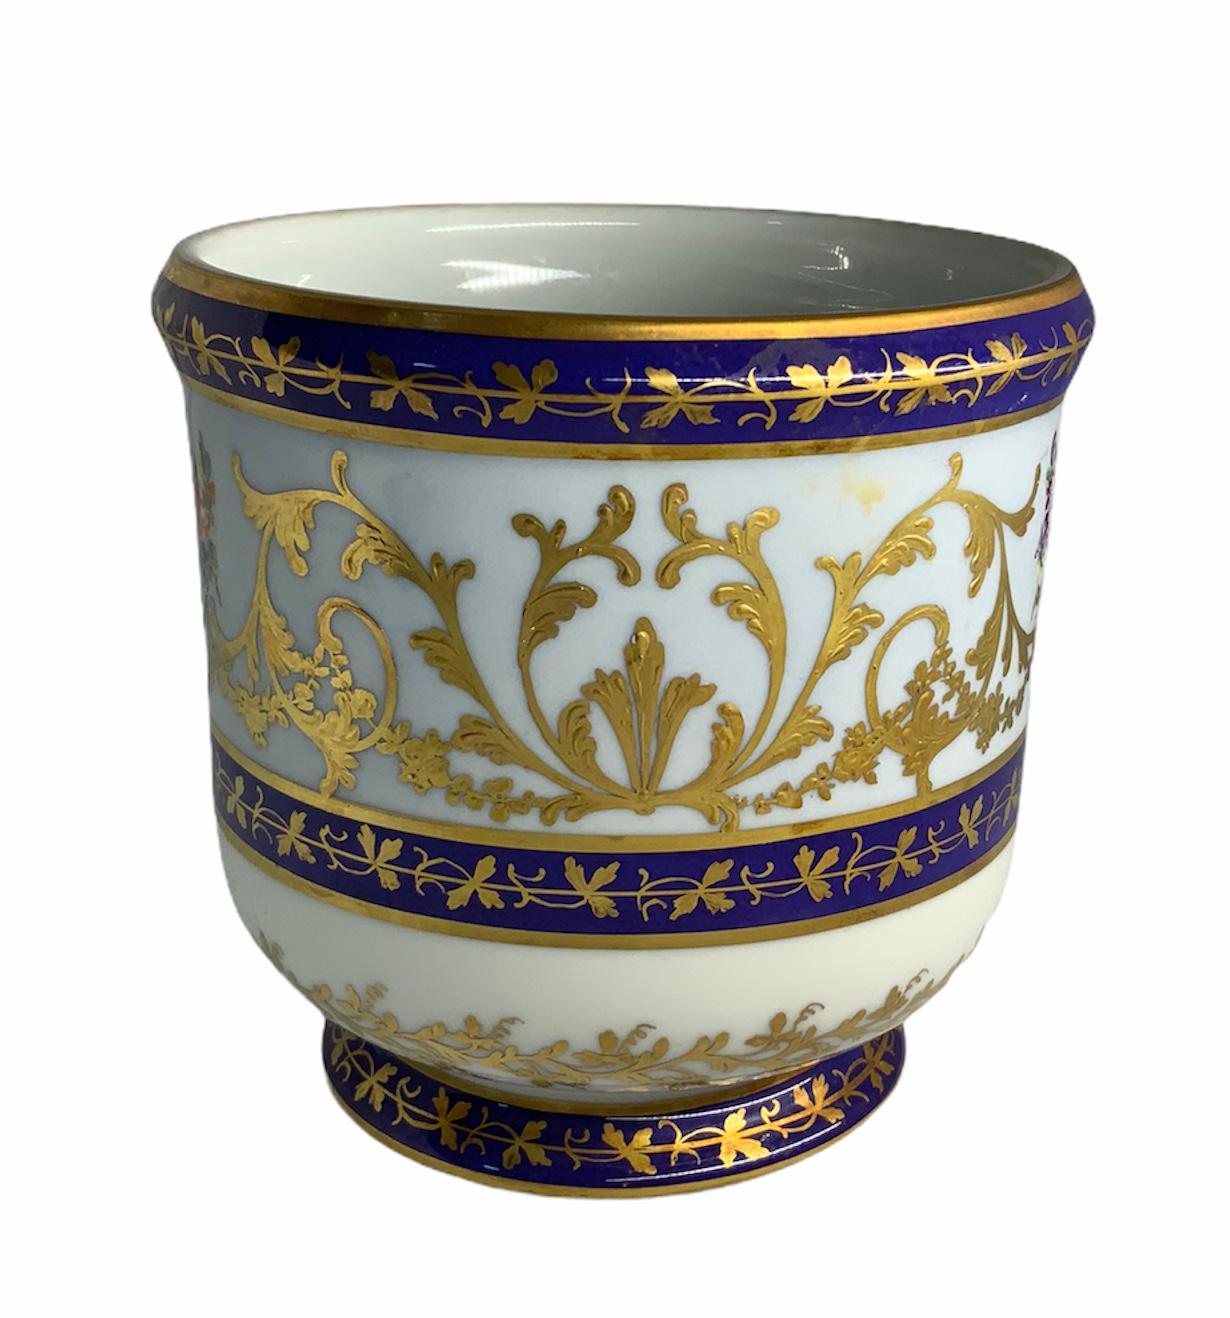 This is a hand painted Porcelain adorned with a gilded centerpiece vase with an arrangement of flowers in the center and gilt acanthus leaves growing around the sides of it. There are three cobalt blue rings around the cachepot decorated with a row